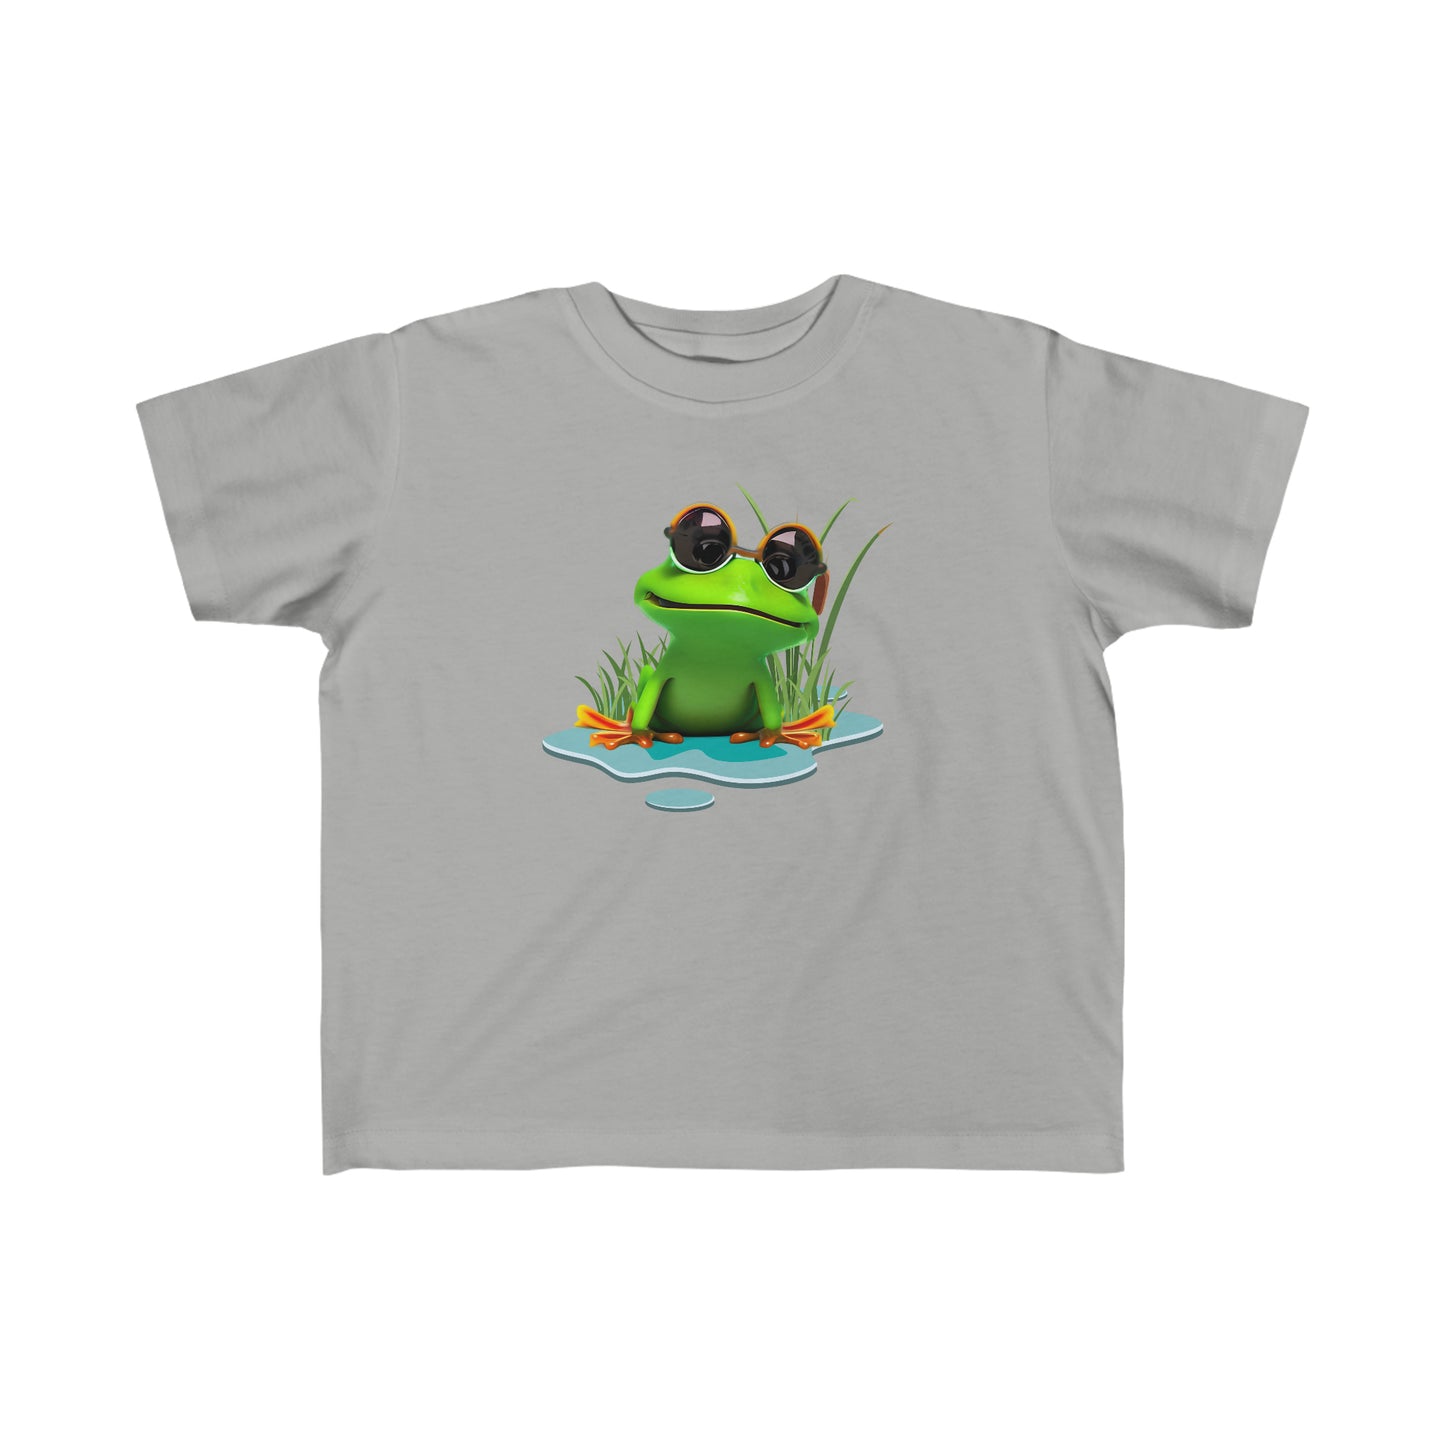 Hop to It Frog T-shirt in Heather Grey